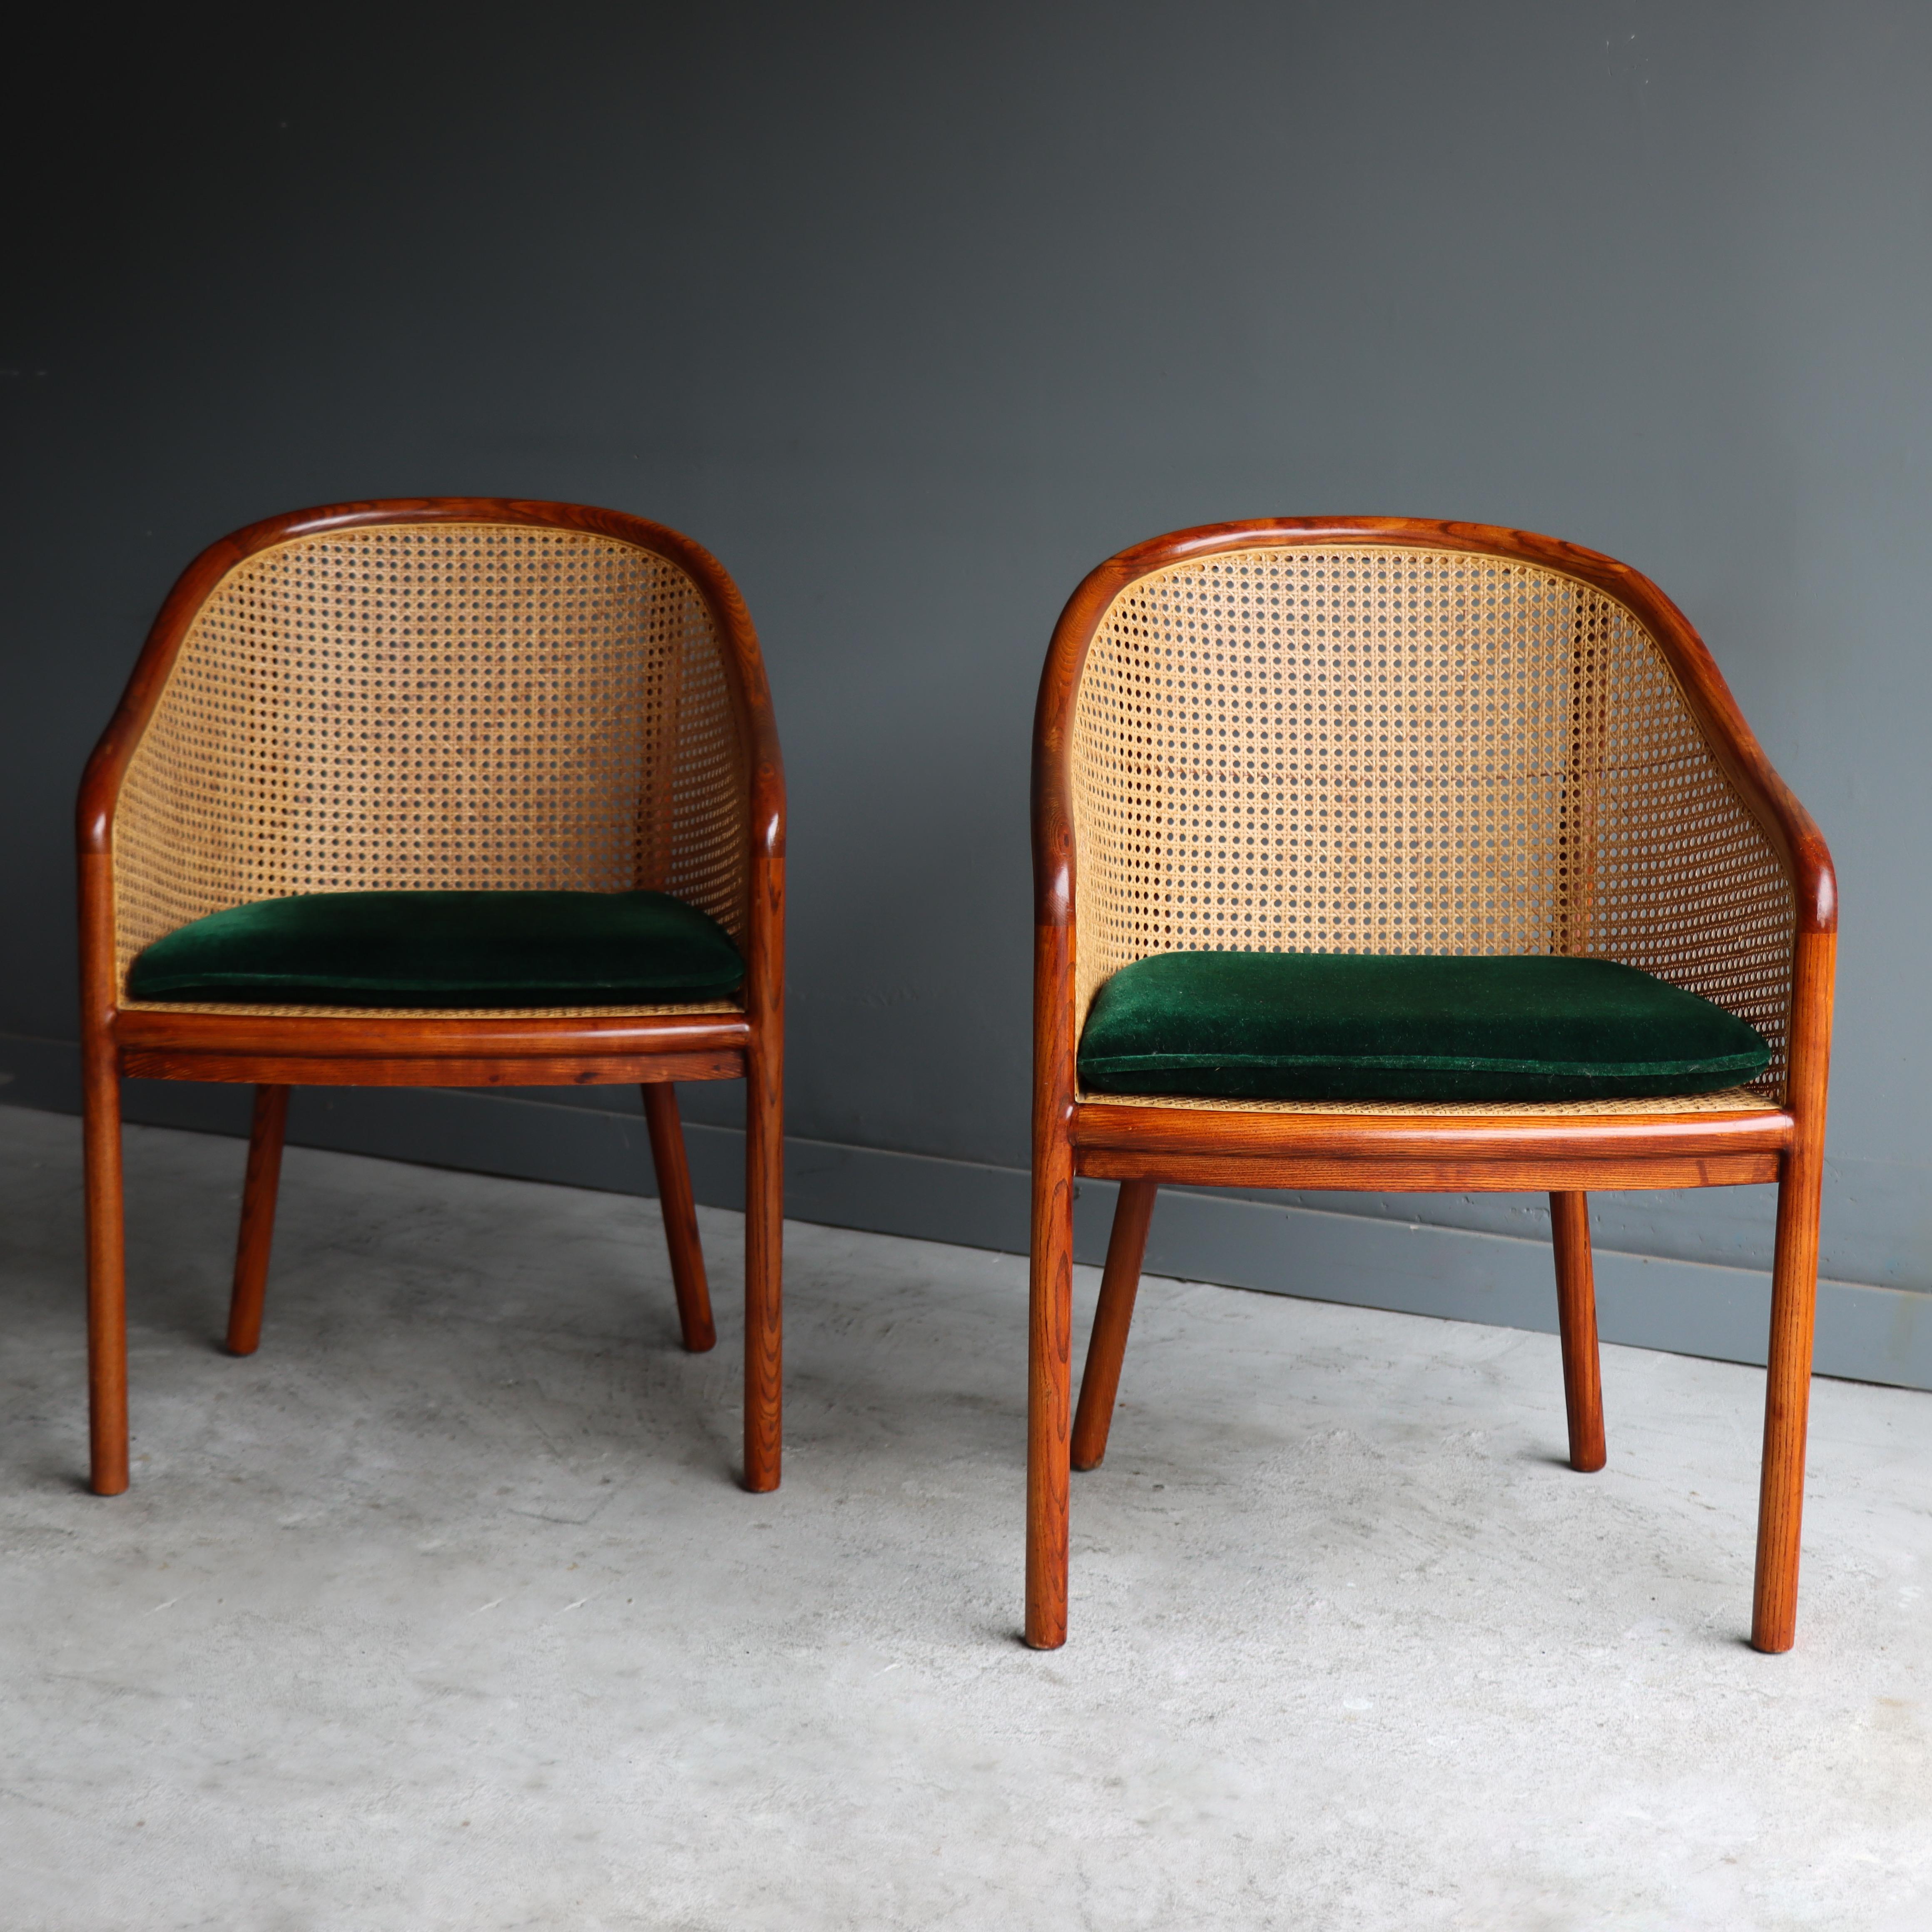 American Vintage Pair of ‘Landmark’ Cane Chairs by Ward Bennett for Brickel, 1970, Mohair For Sale